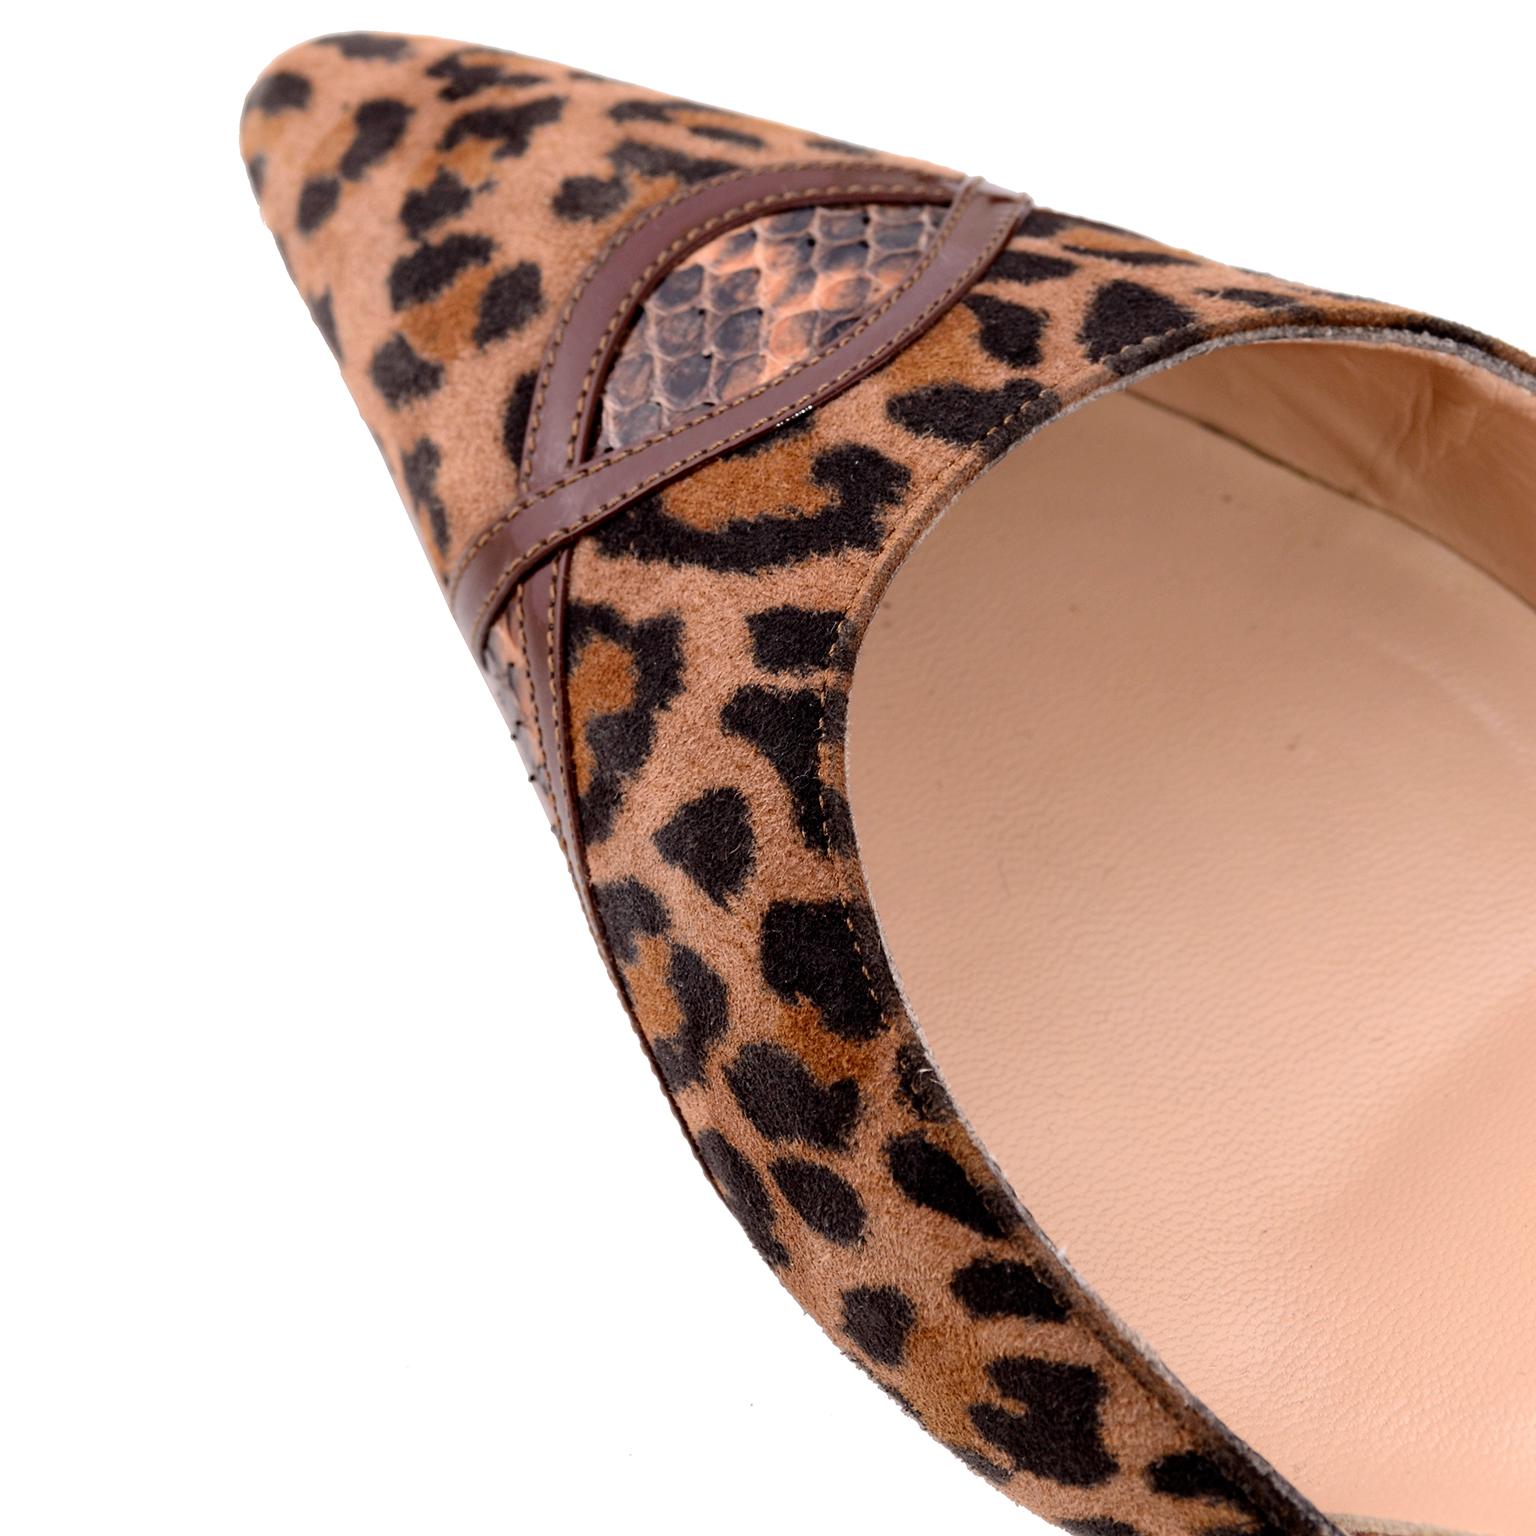 These are stunning Manolo Blahnik shoes in a size 38.5 or US 8. These D'Orsay open side pump heels with pointed toe. Leather upper in cheetah print with patent leather decoration enclosing snakeskin details. Brown heel and leather soles, these look